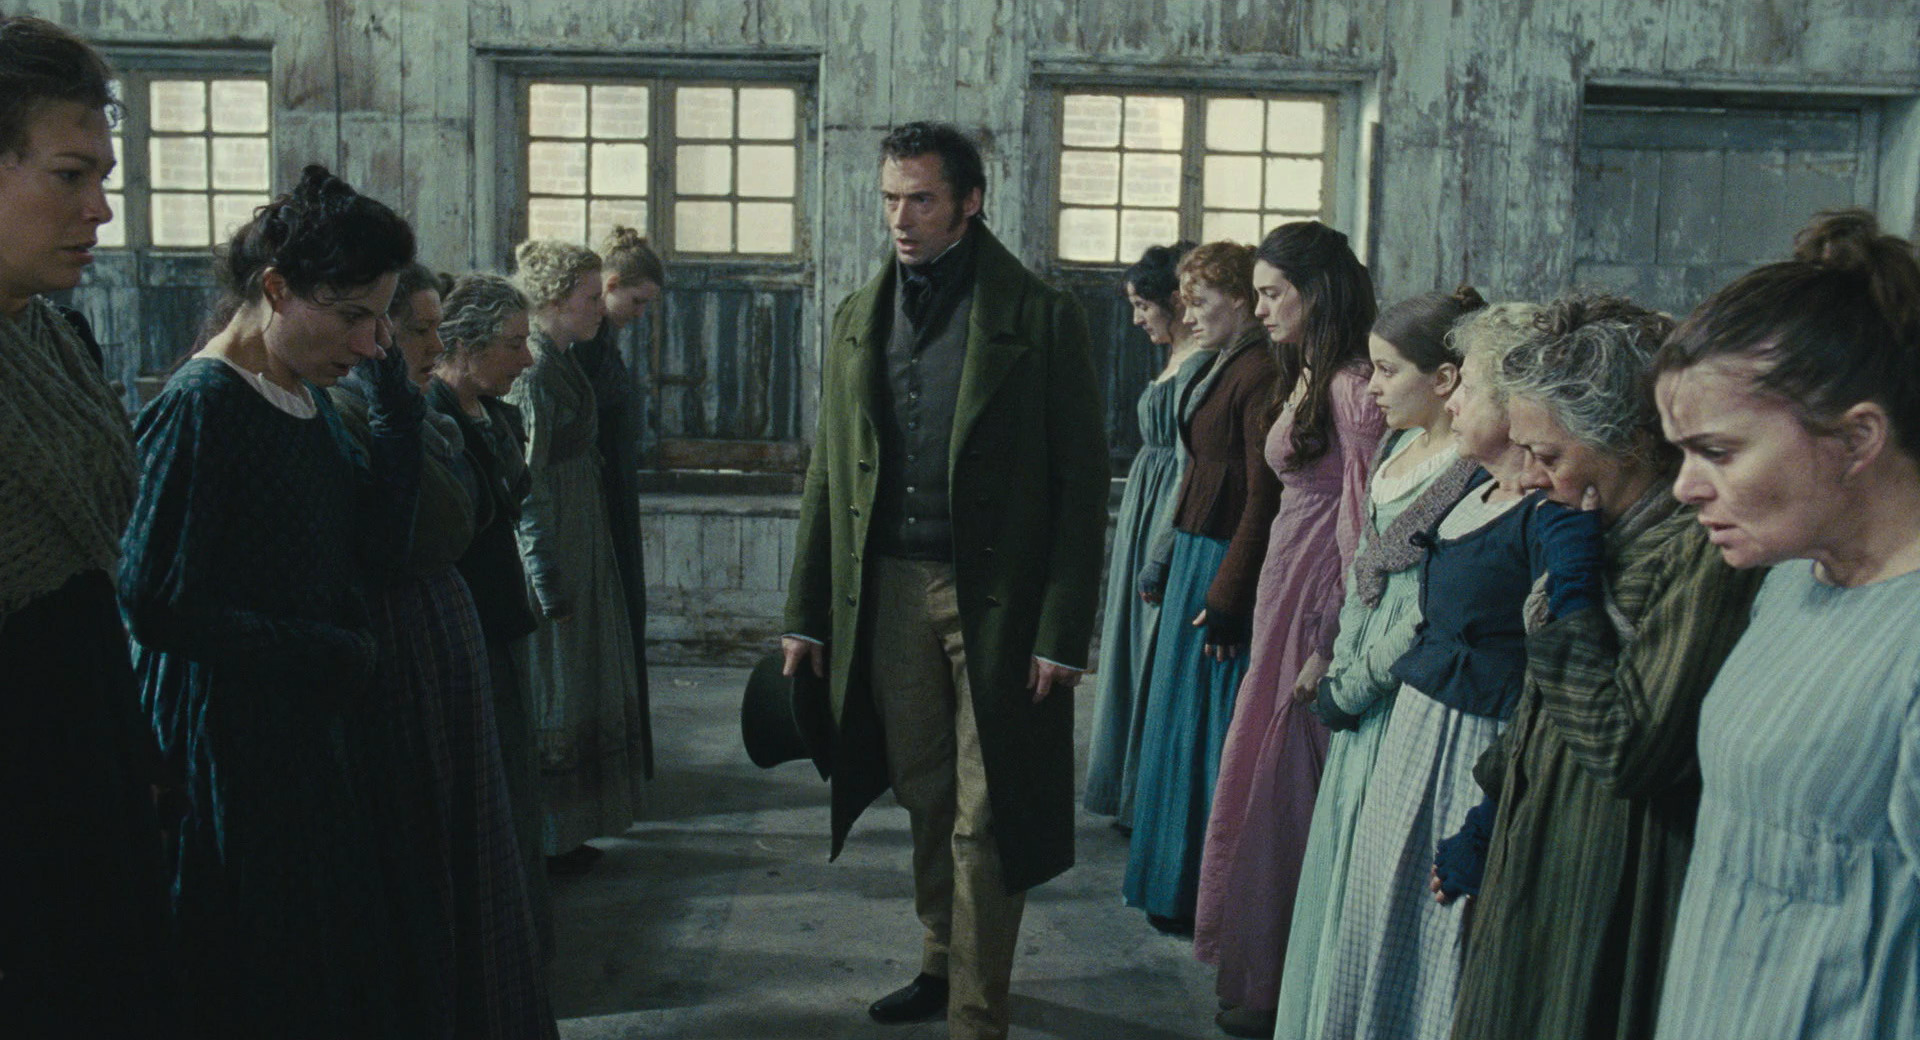 https://vignette.wikia.nocookie.net/lesmiserables/images/5/5a/Jean_Valjean_End_of_the_Day.png/revision/latest?cb=20130711215614